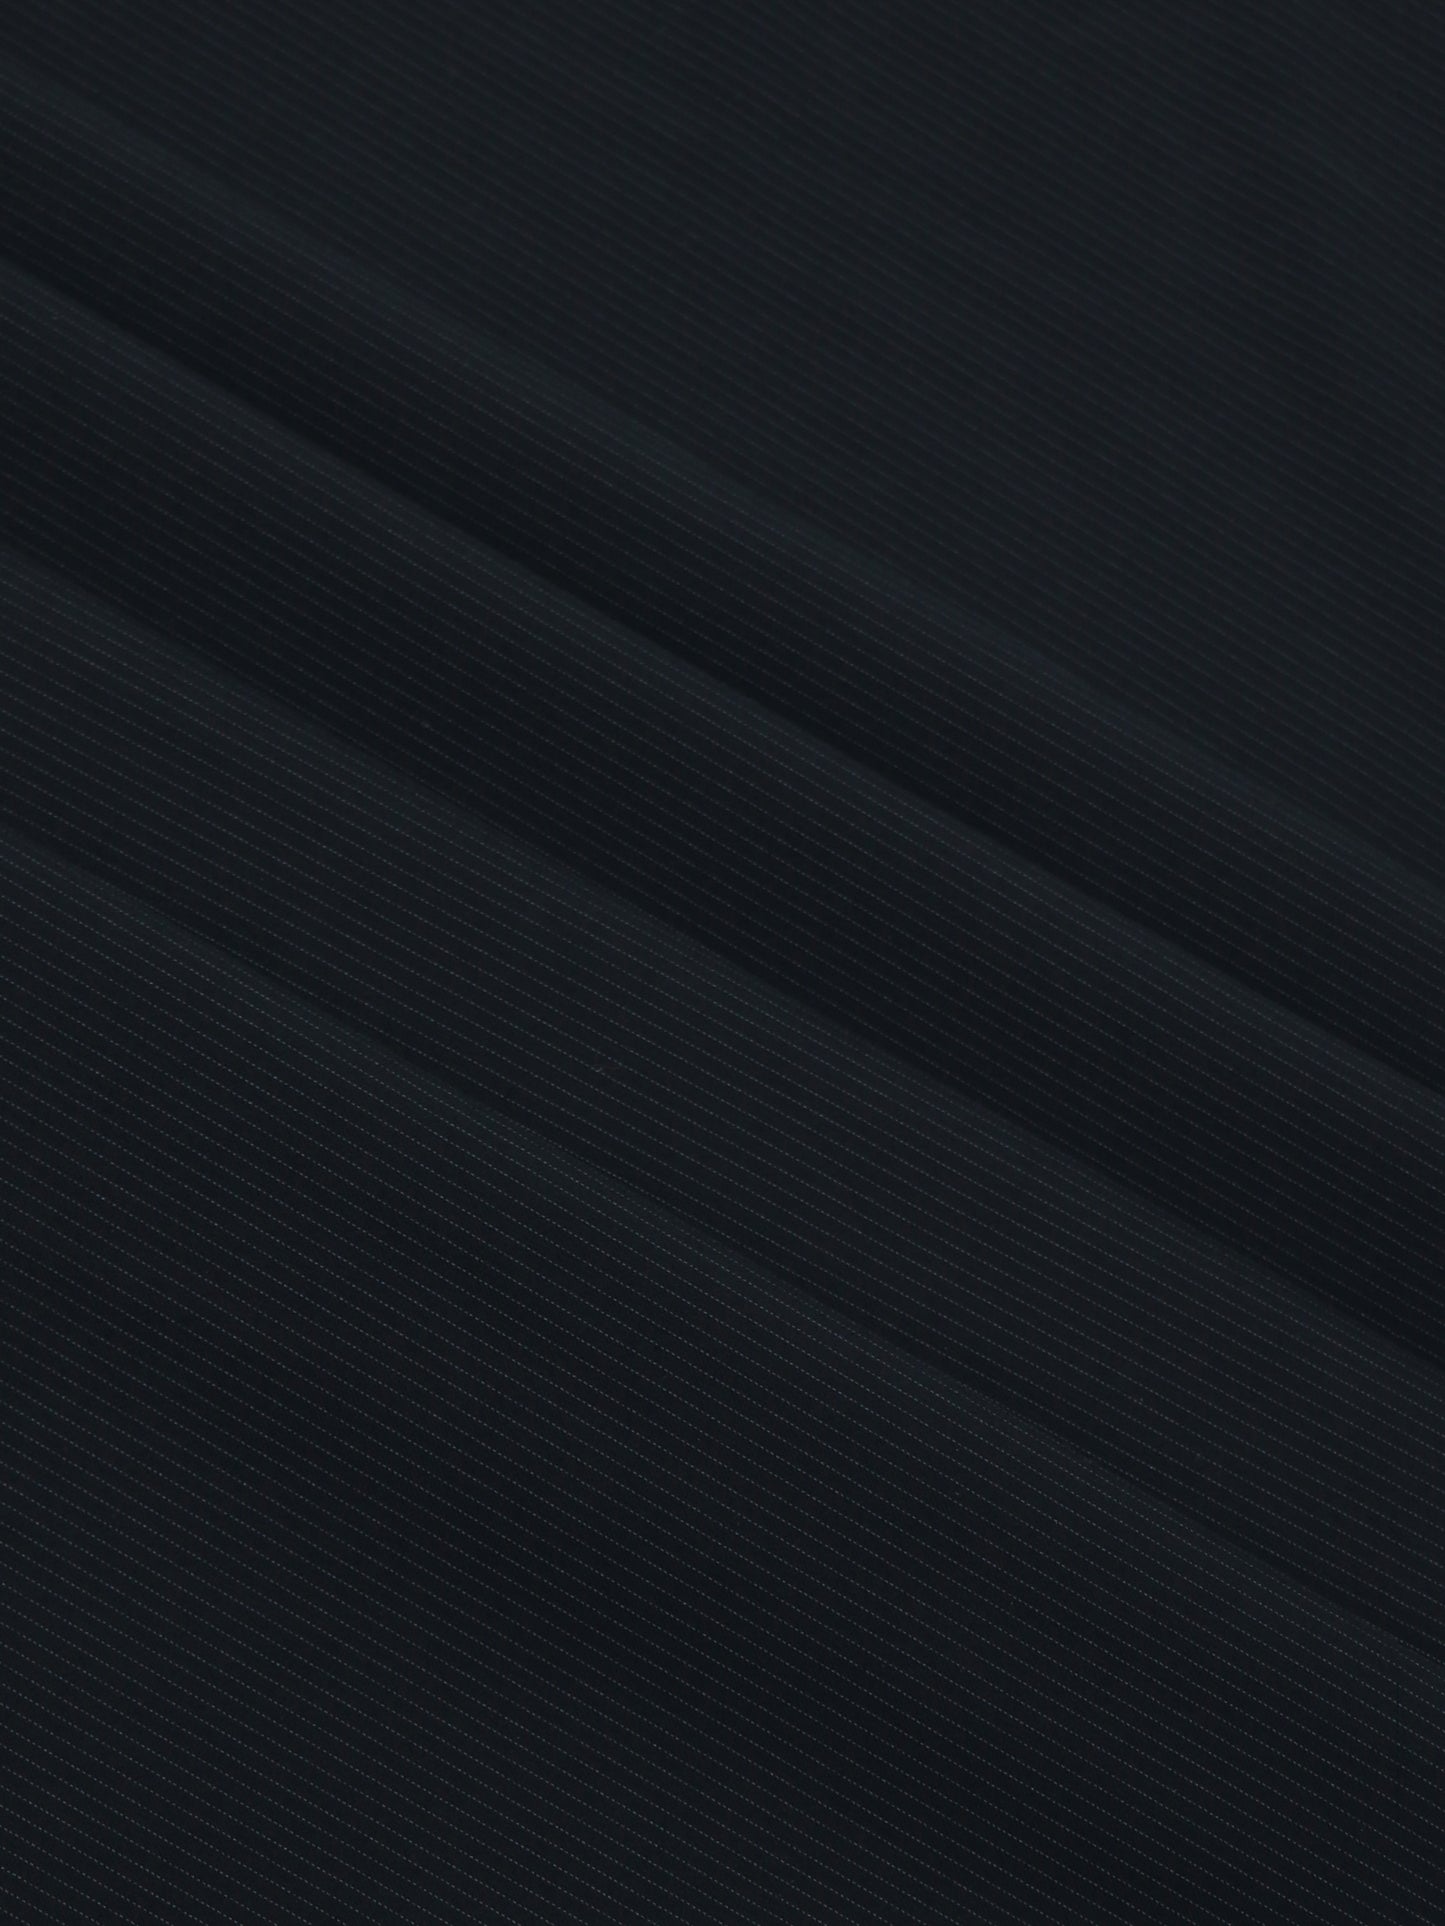 Men's Suiting Fabric For Pant and Coat Lining Black